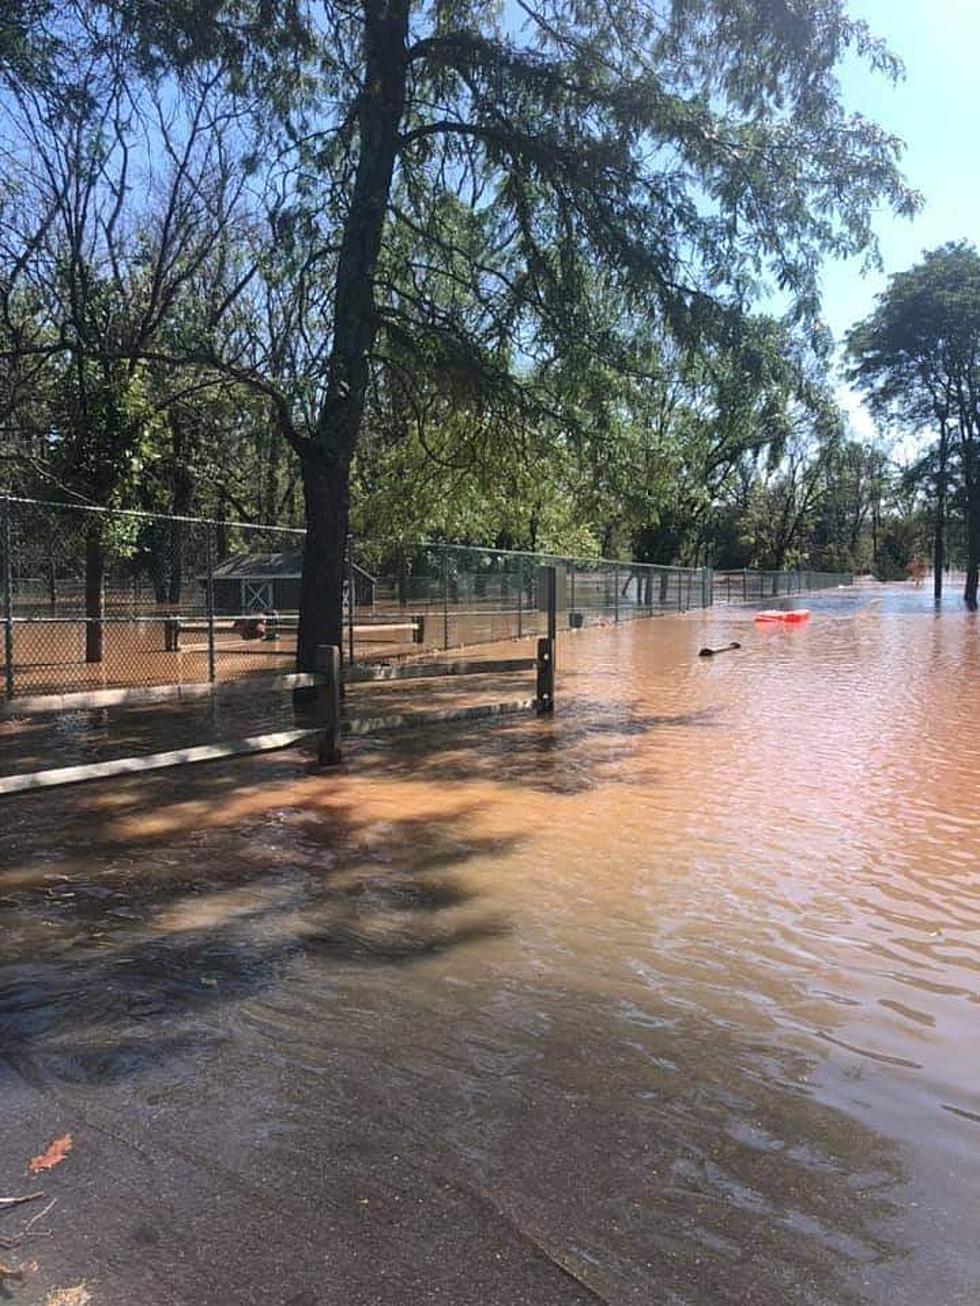 At flood-prone zoo in Piscataway, NJ, animals&#8217; fate unclear as winter arrives